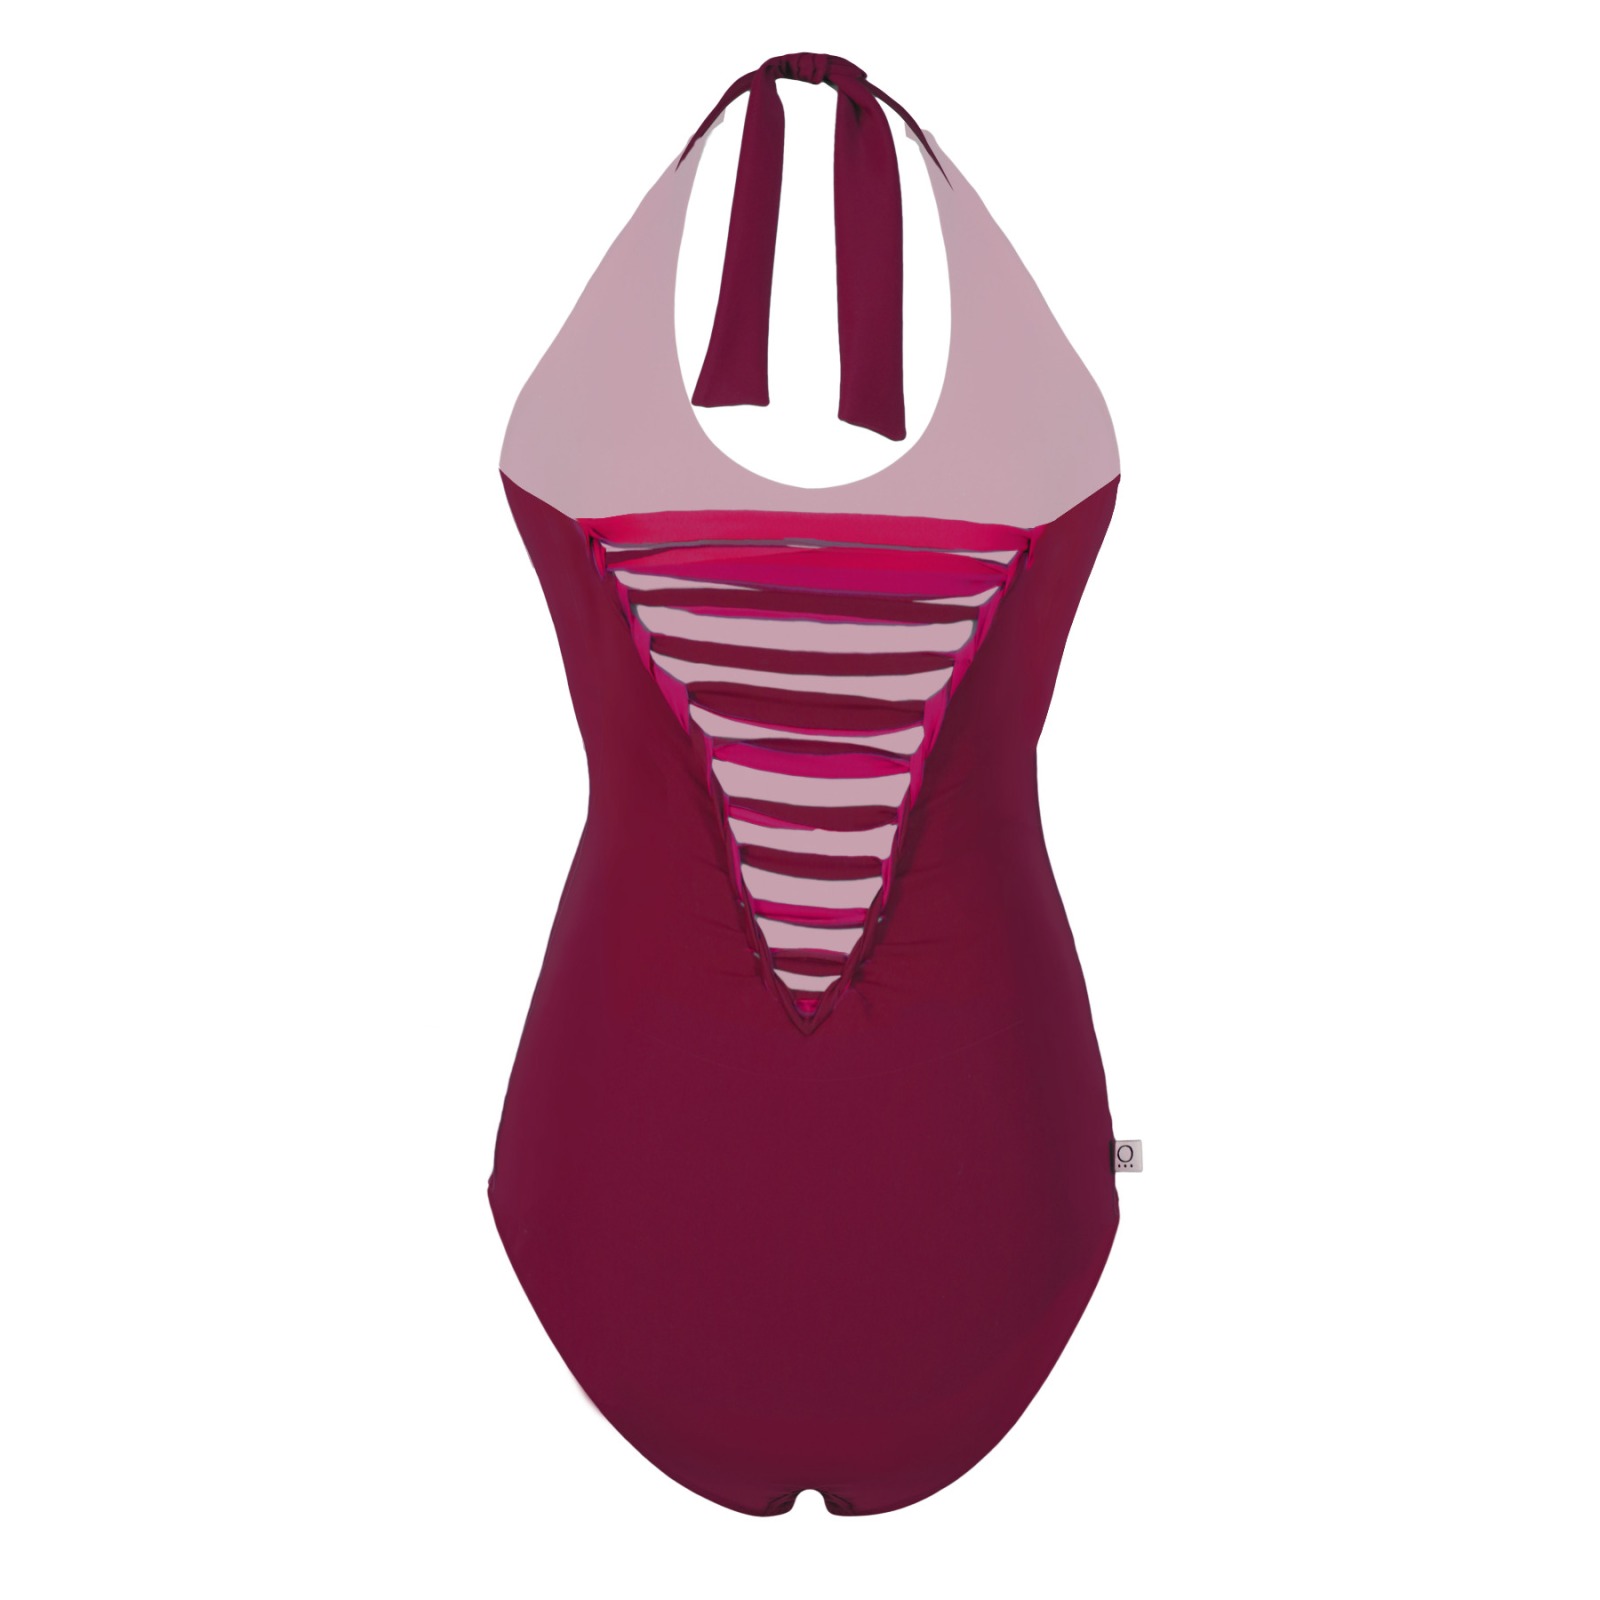 Recycling swimsuit Laik II fire tinto + vino red